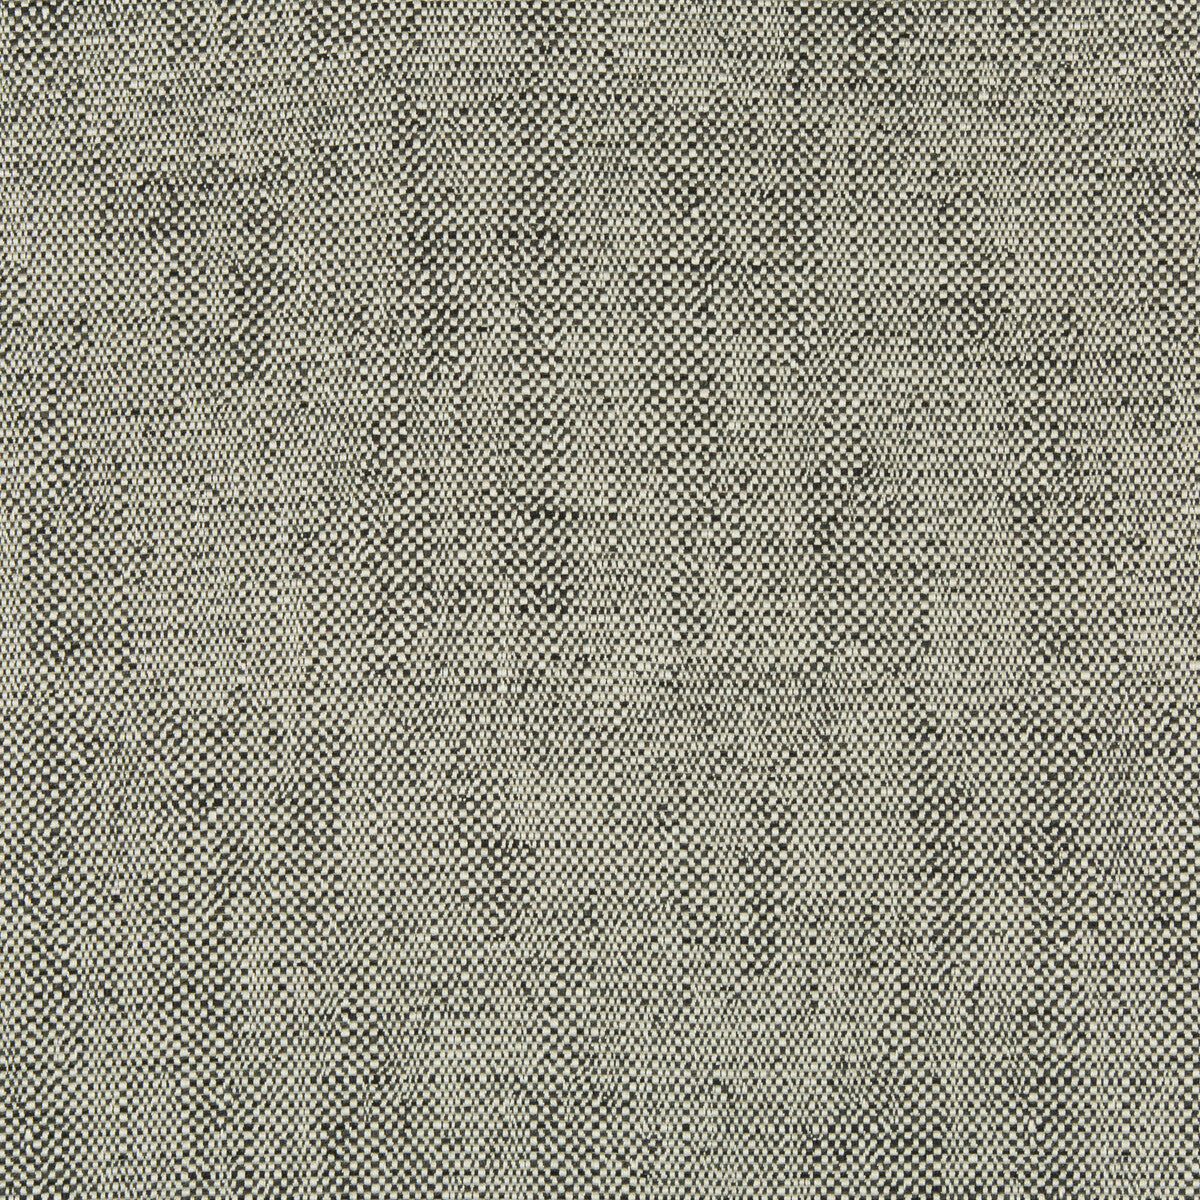 Kravet Design fabric in 35135-81 color - pattern 35135.81.0 - by Kravet Design in the Performance Crypton Home collection